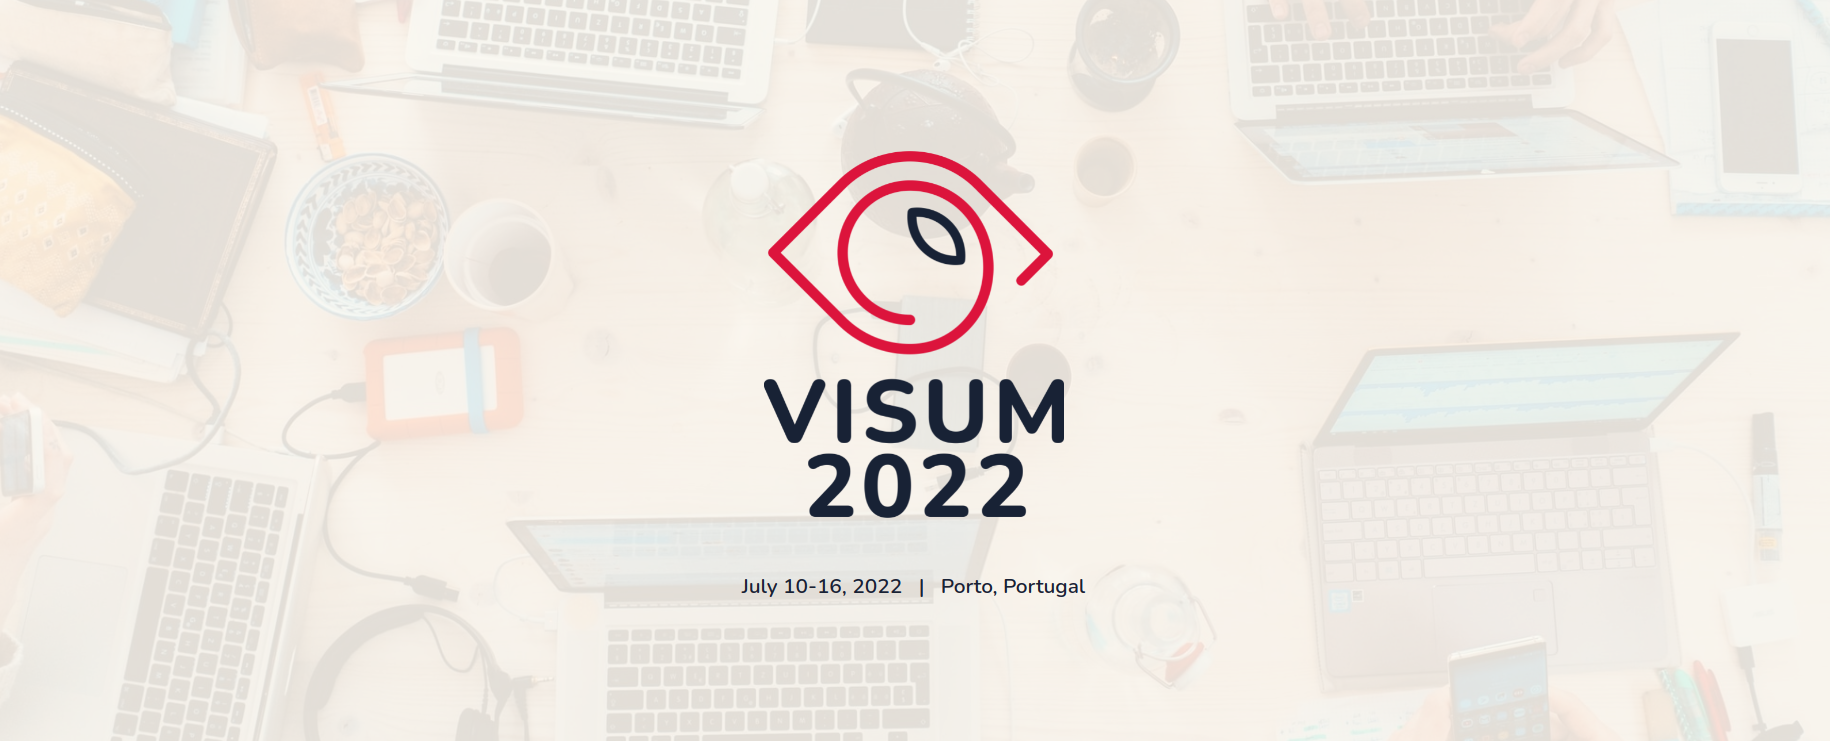 Portuguese Institute Organizes Summer School on Computer Vision and Artificial Intelligence